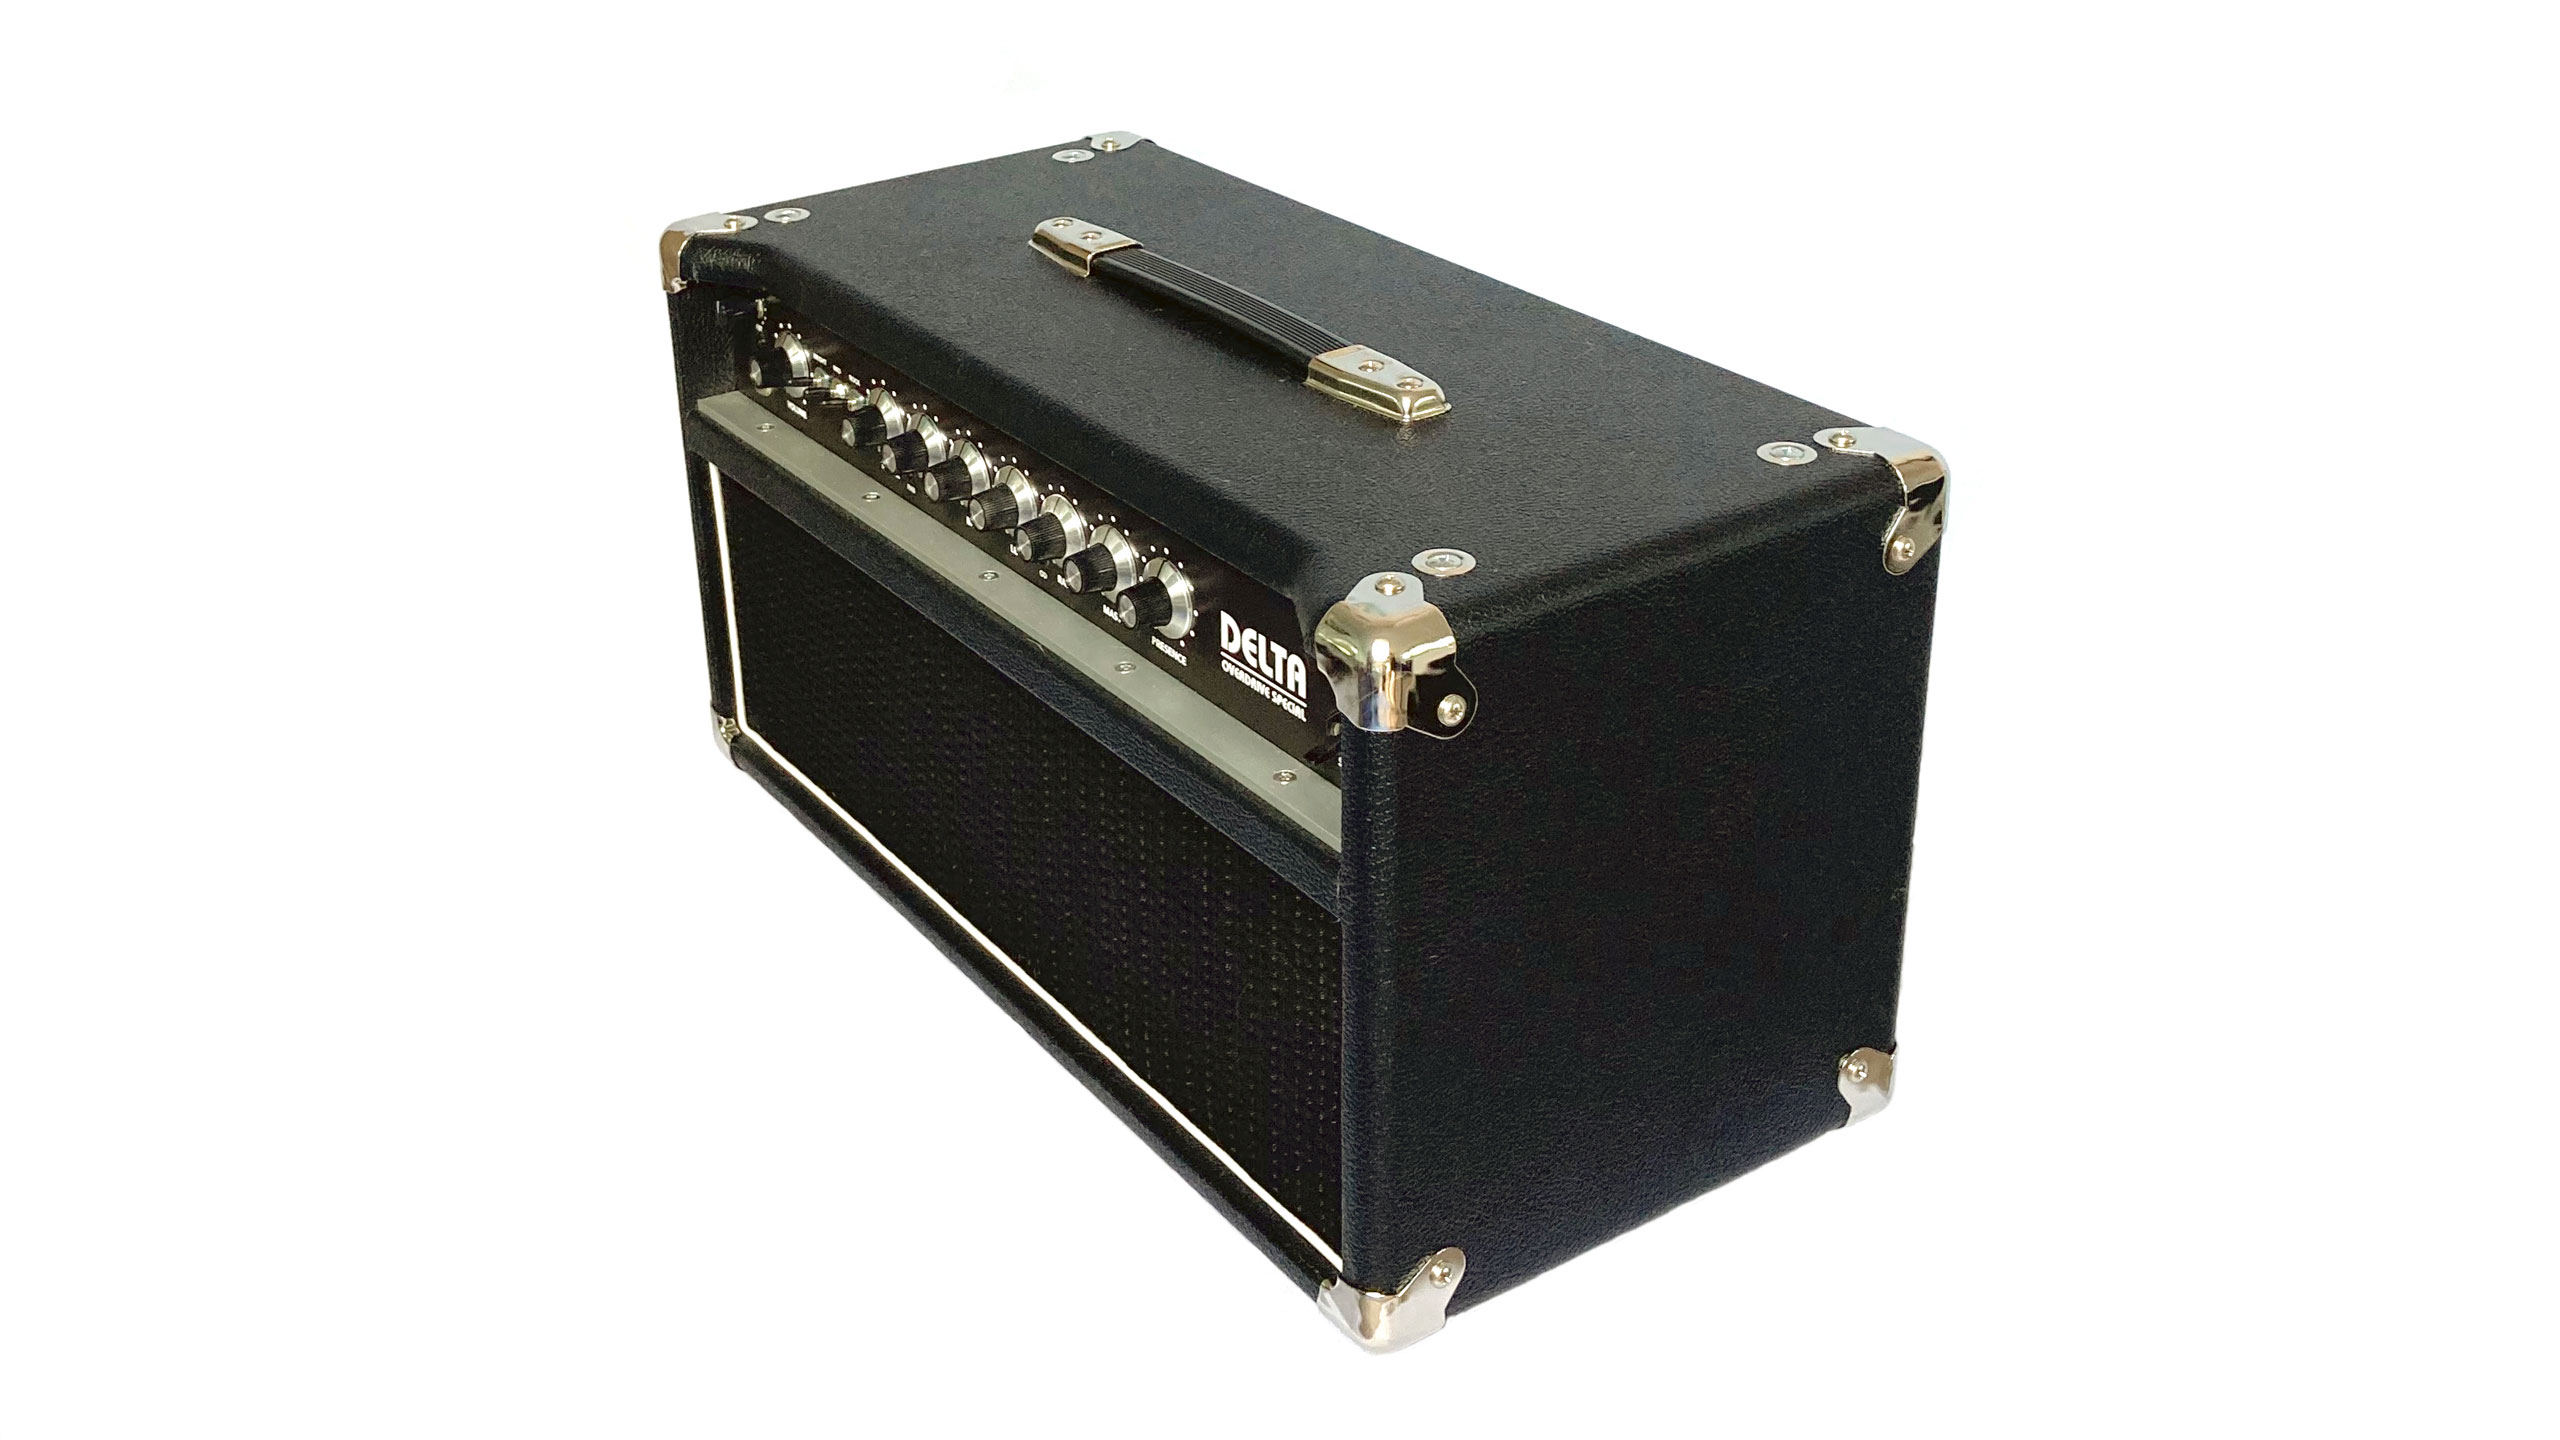 Delta guitar amp - right front high